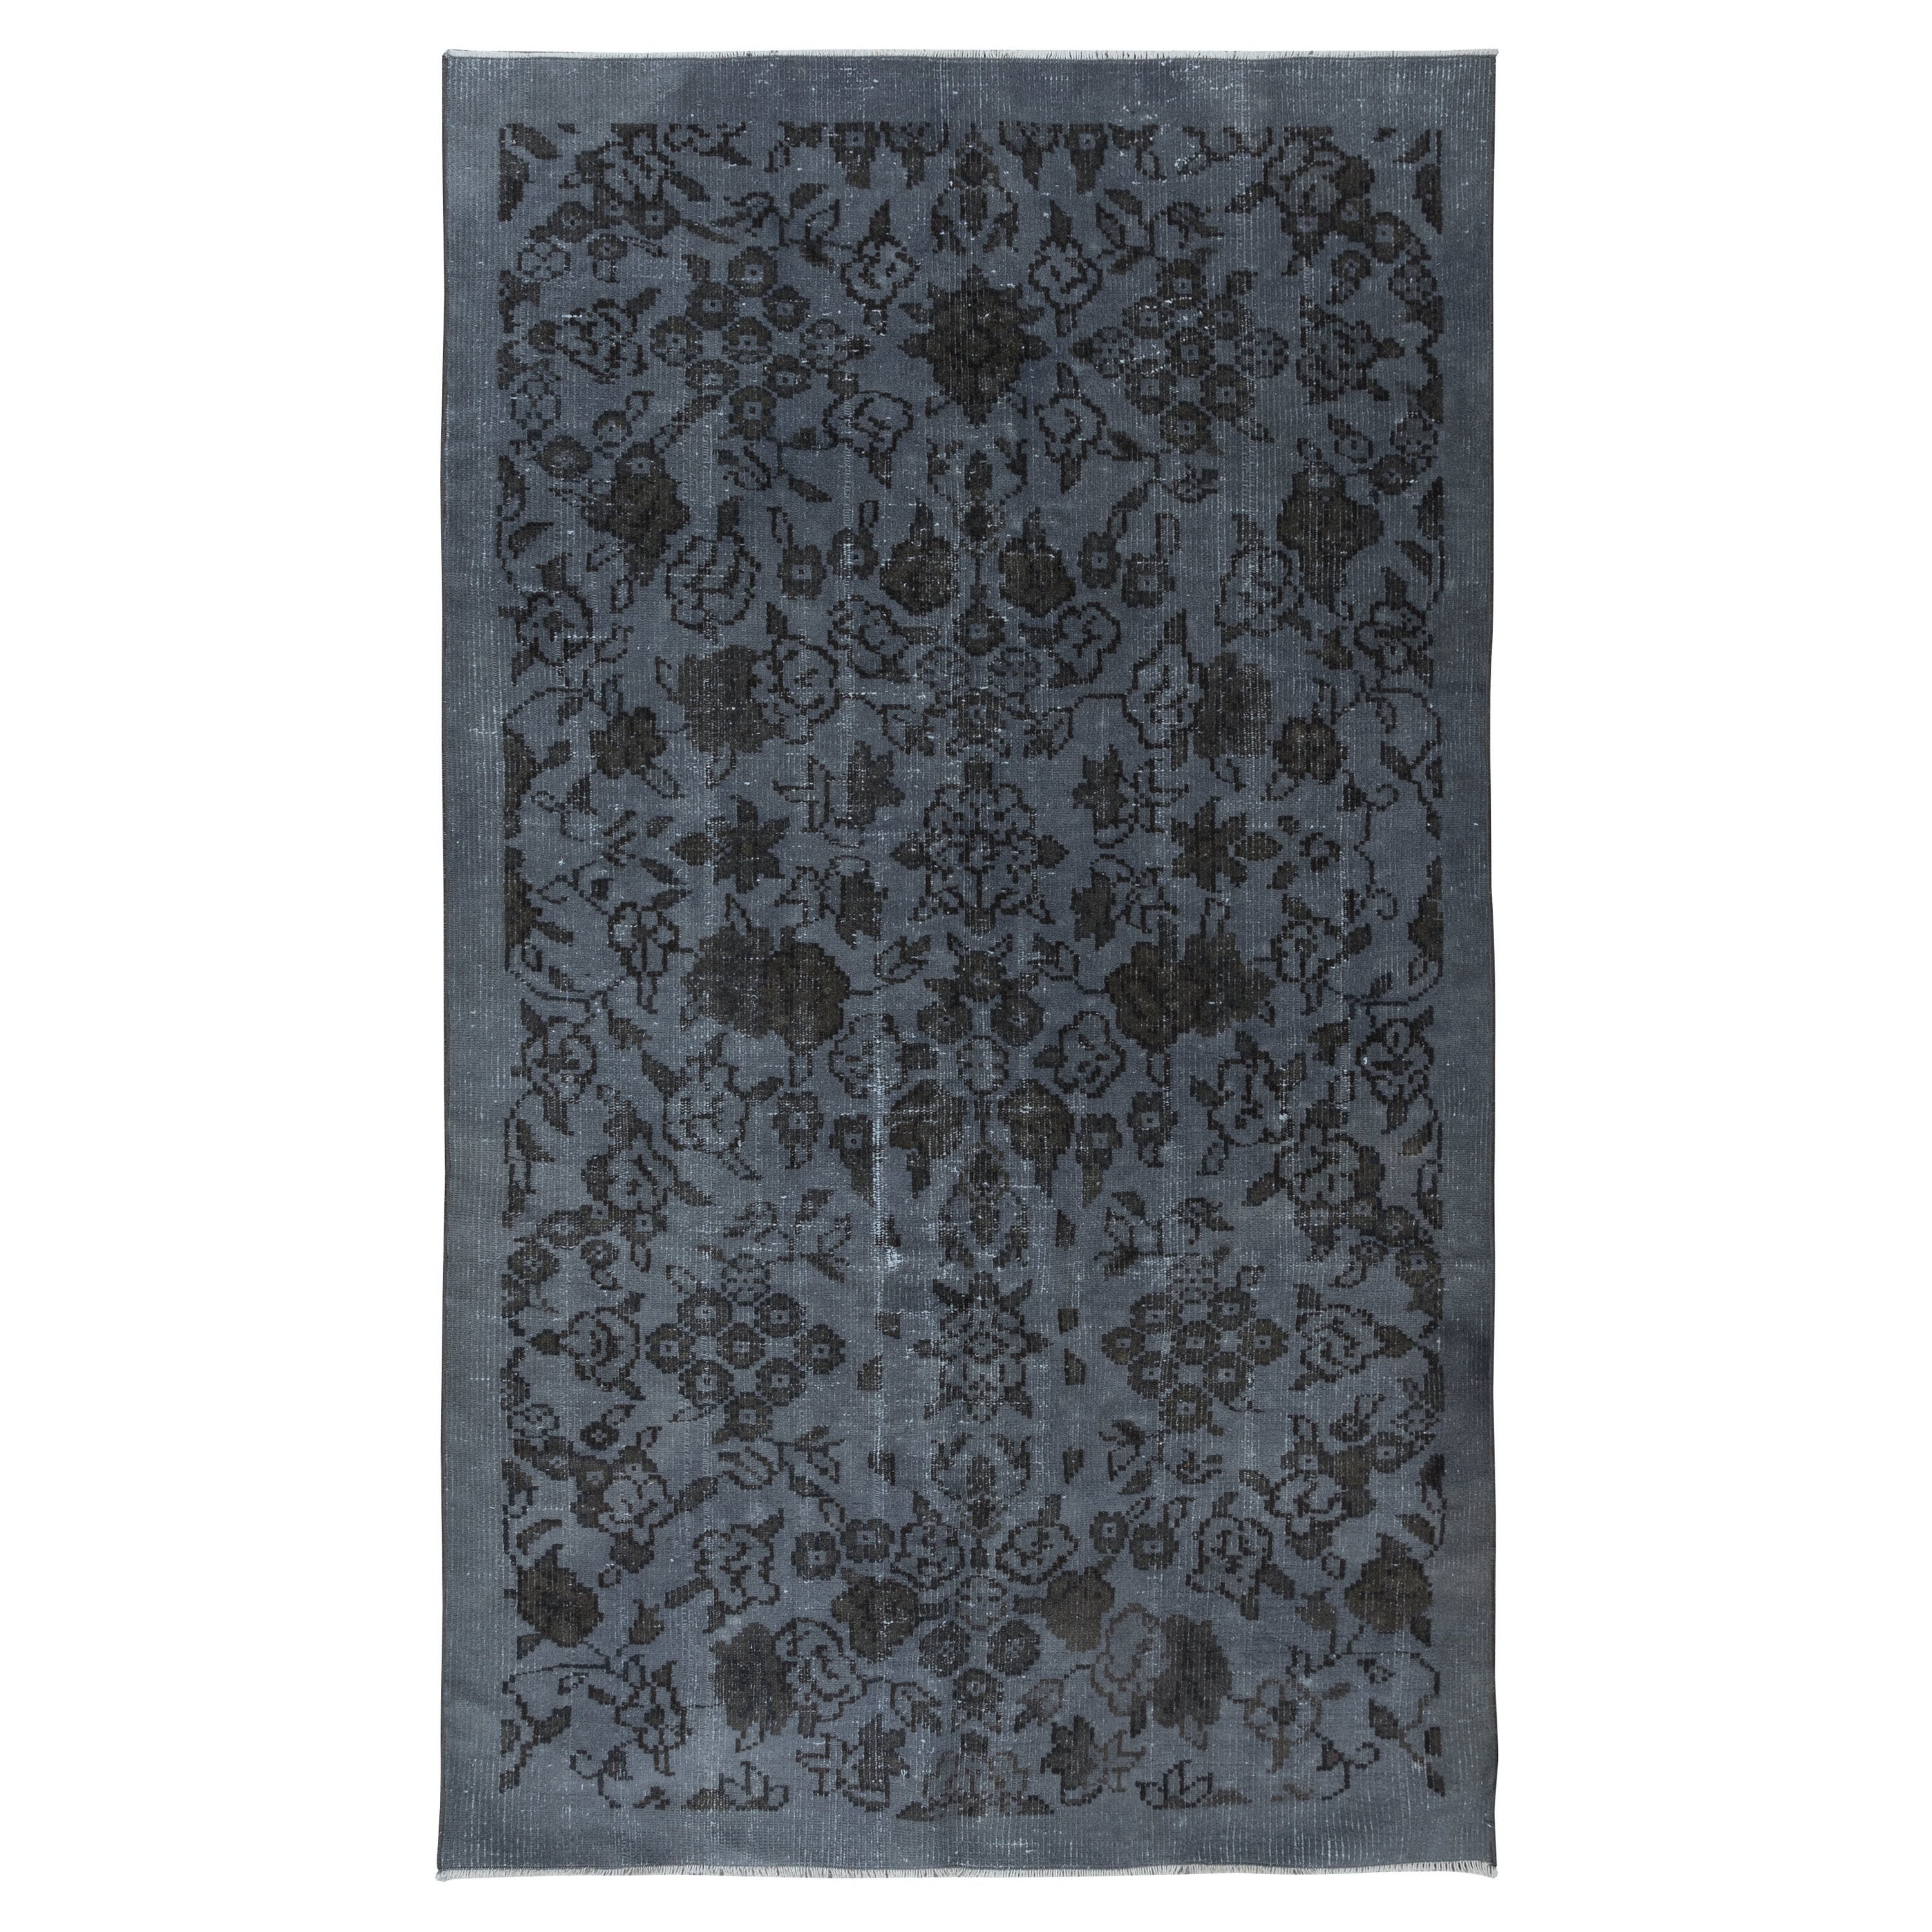 4.8x8 Ft Handmade Turkish Rug with Dark Gray Background and Brown Floral Pattern For Sale